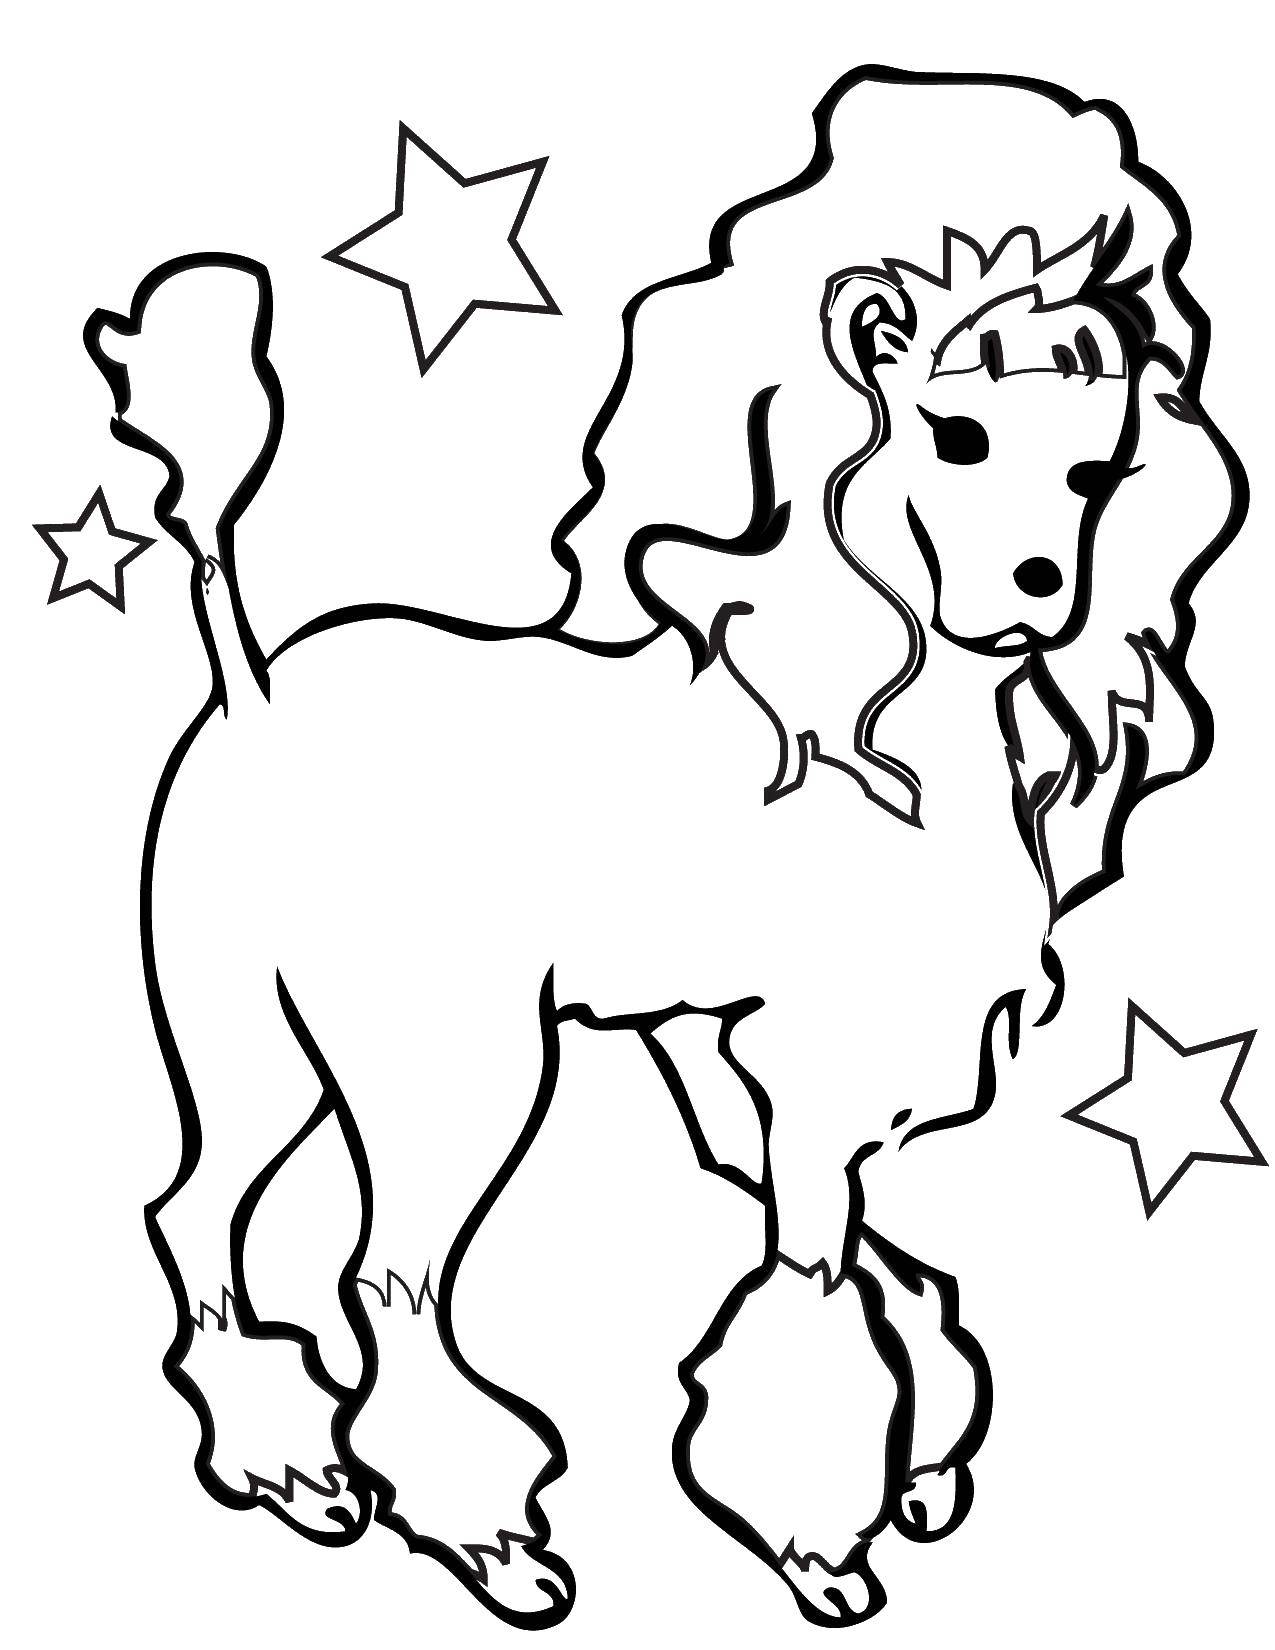 Coloring Wonderful poodle among the stars. Category animals. Tags:  Animals, dog, poodle.